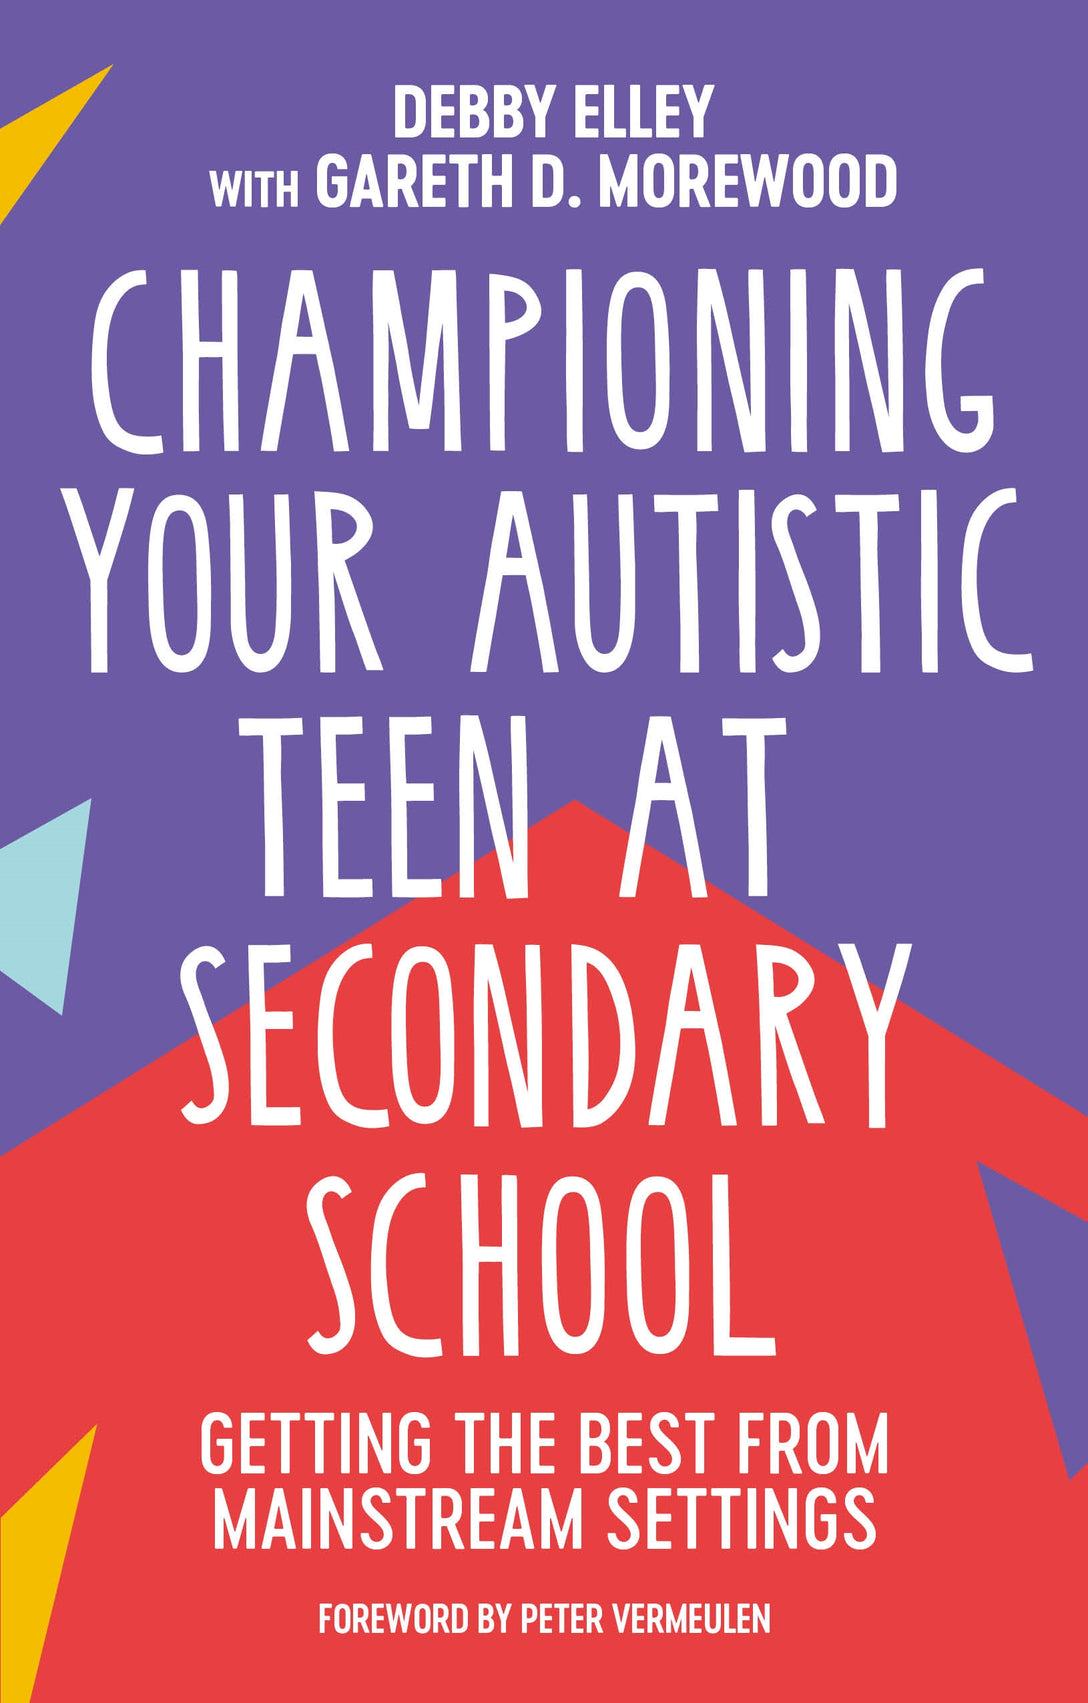 Championing Your Autistic Teen at Secondary School by Debby Elley, Gareth D. Morewood, Terry Culkin, Peter Vermeulen